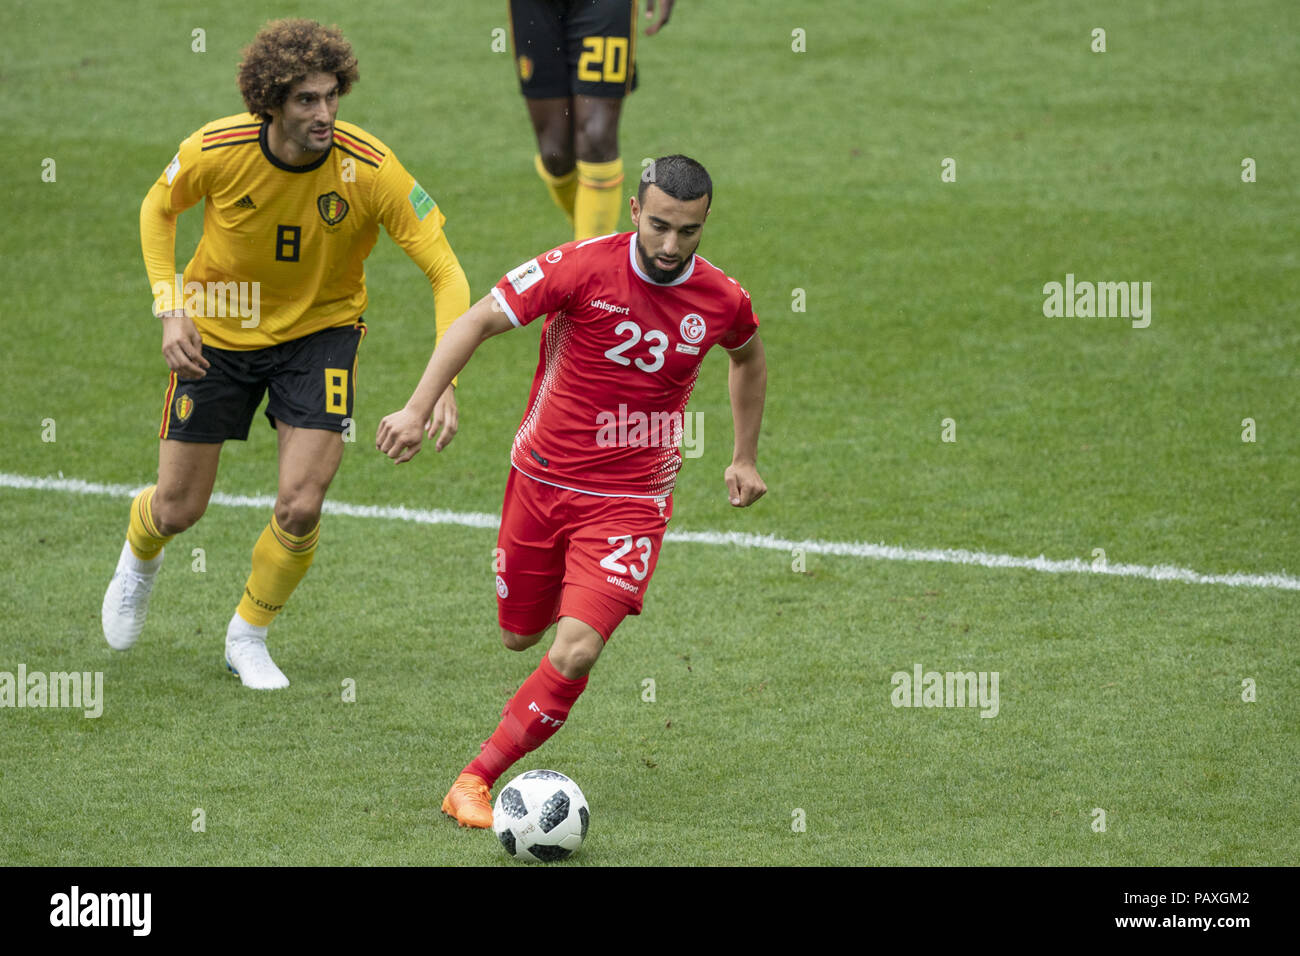 2018 FIFA World Cup group G match between Belgium and Tunisia at Otkritie Arena in Moscow, Russia.  Featuring: Marouane FELLAINI of Belgium, Naim SLITI of Tunisia Where: Moscow, Central Federal District, Russian Federation When: 23 Jun 2018 Credit: Anthony Stanley/WENN.com Stock Photo